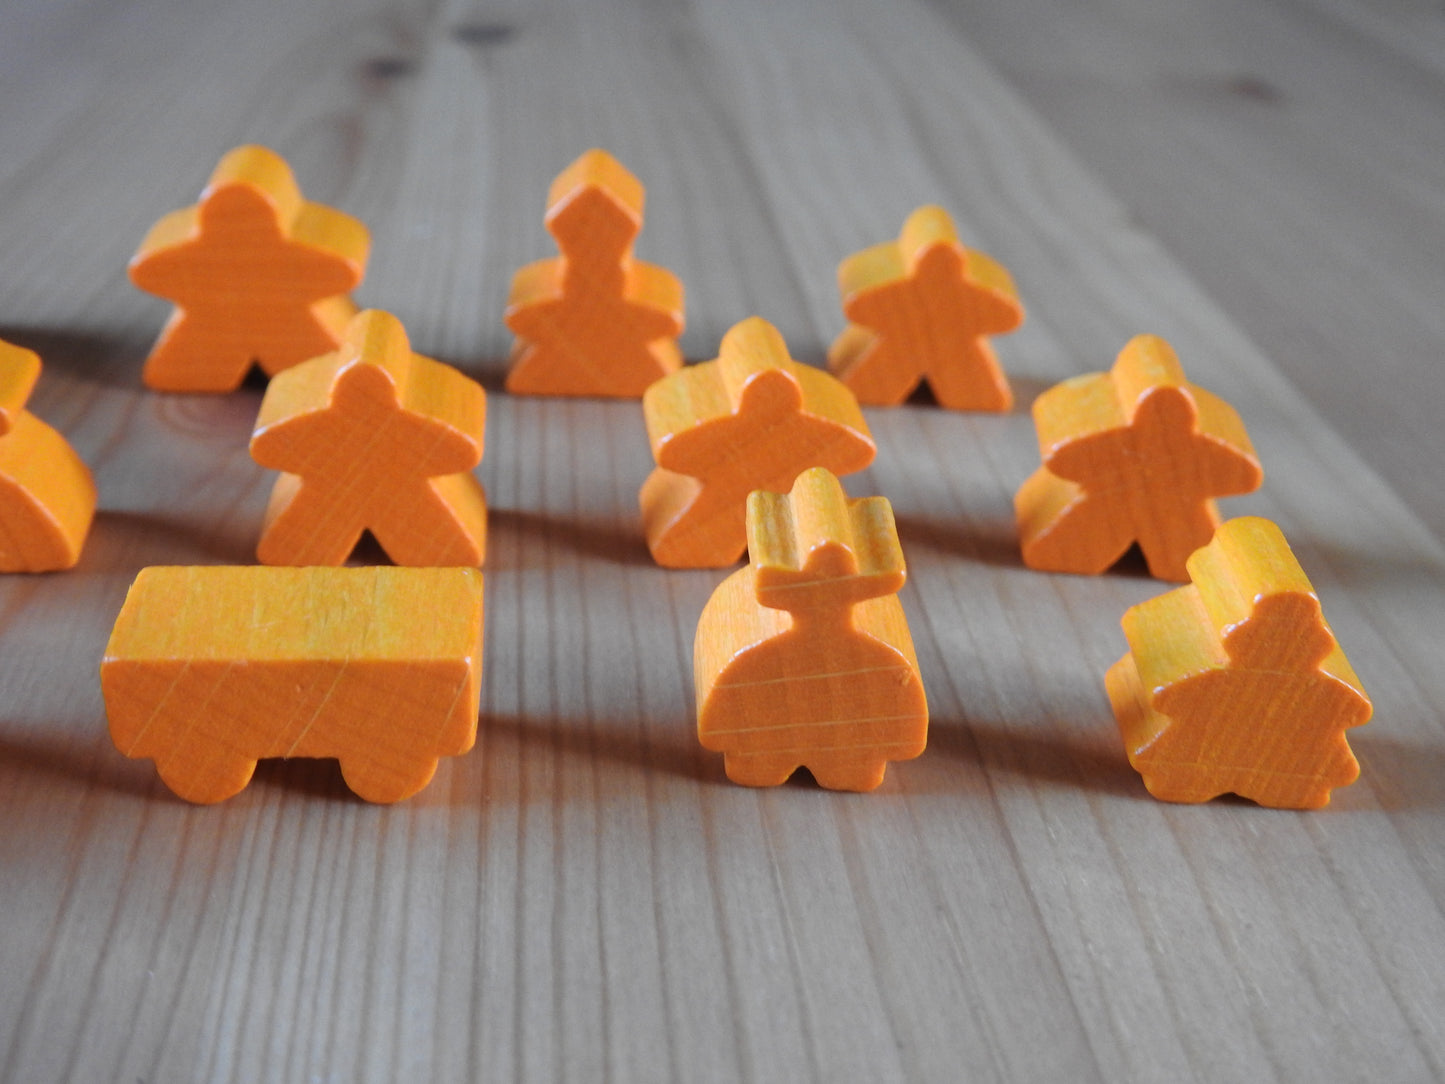 Close-up of the orange robber and messenger meeple figures.